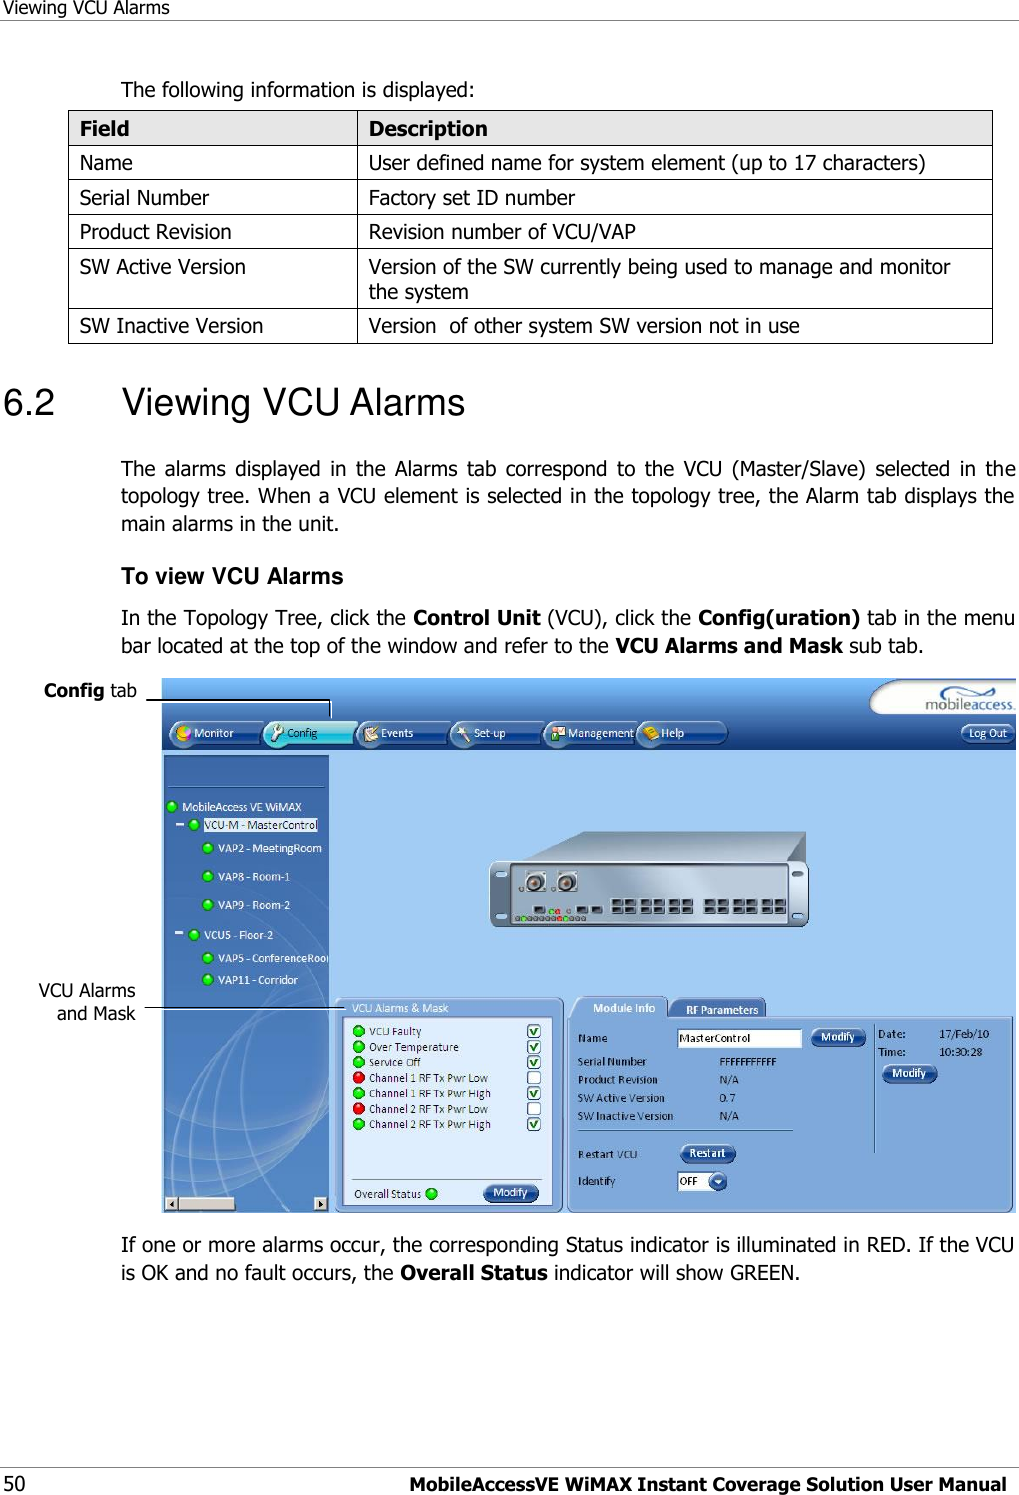 Viewing VCU Alarms 50 MobileAccessVE WiMAX Instant Coverage Solution User Manual The following information is displayed: Field Description Name User defined name for system element (up to 17 characters) Serial Number Factory set ID number Product Revision Revision number of VCU/VAP SW Active Version Version of the SW currently being used to manage and monitor the system SW Inactive Version Version  of other system SW version not in use 6.2  Viewing VCU Alarms The  alarms  displayed  in  the  Alarms  tab  correspond  to  the  VCU  (Master/Slave)  selected  in  the topology tree. When a VCU element is selected in the topology tree, the Alarm tab displays the main alarms in the unit. To view VCU Alarms  In the Topology Tree, click the Control Unit (VCU), click the Config(uration) tab in the menu bar located at the top of the window and refer to the VCU Alarms and Mask sub tab.  If one or more alarms occur, the corresponding Status indicator is illuminated in RED. If the VCU is OK and no fault occurs, the Overall Status indicator will show GREEN. Config tab VCU Alarms and Mask 